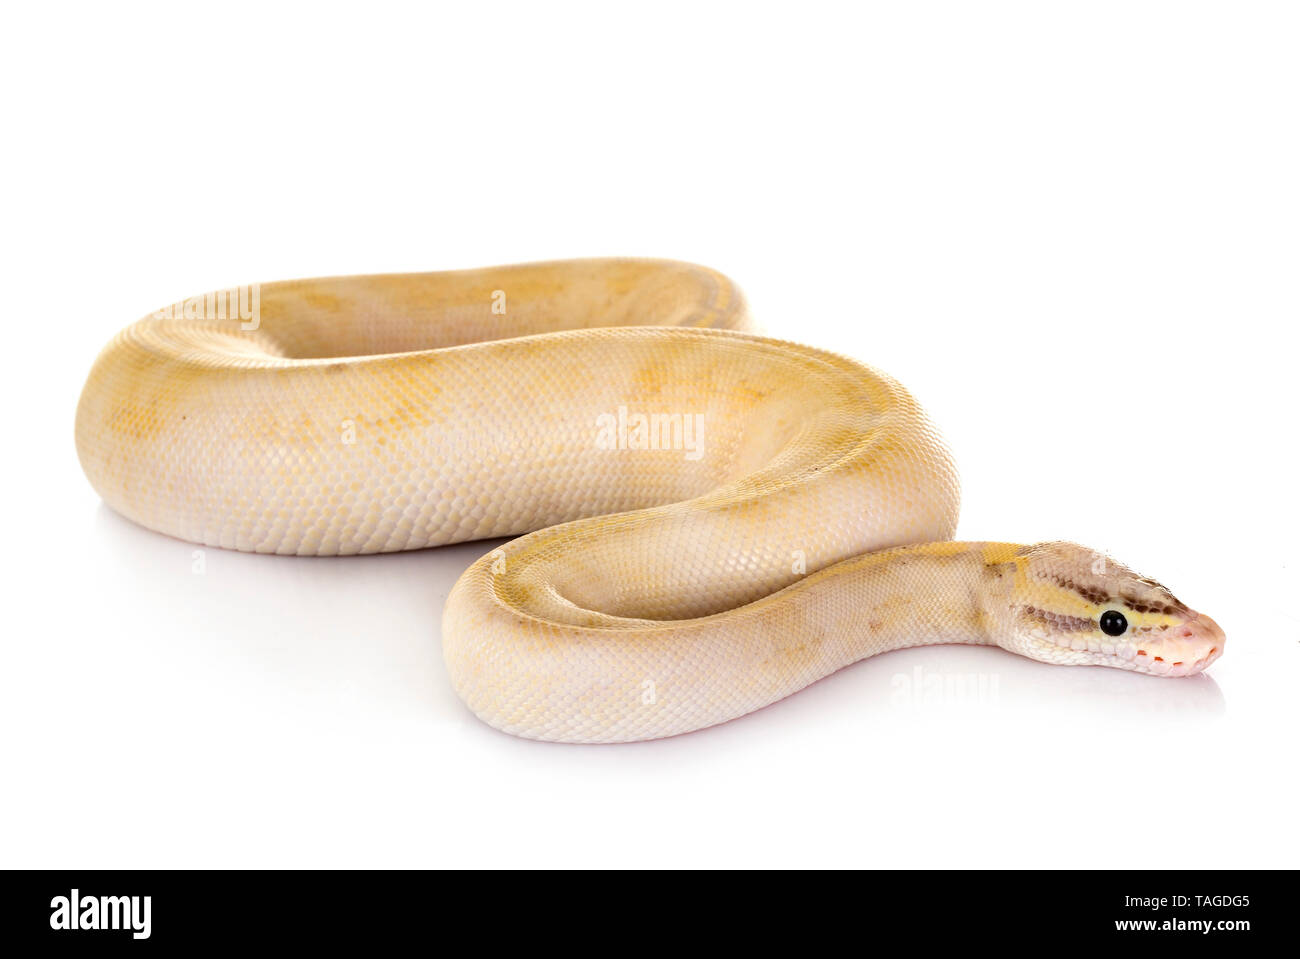 Ball python in front of white background Stock Photo